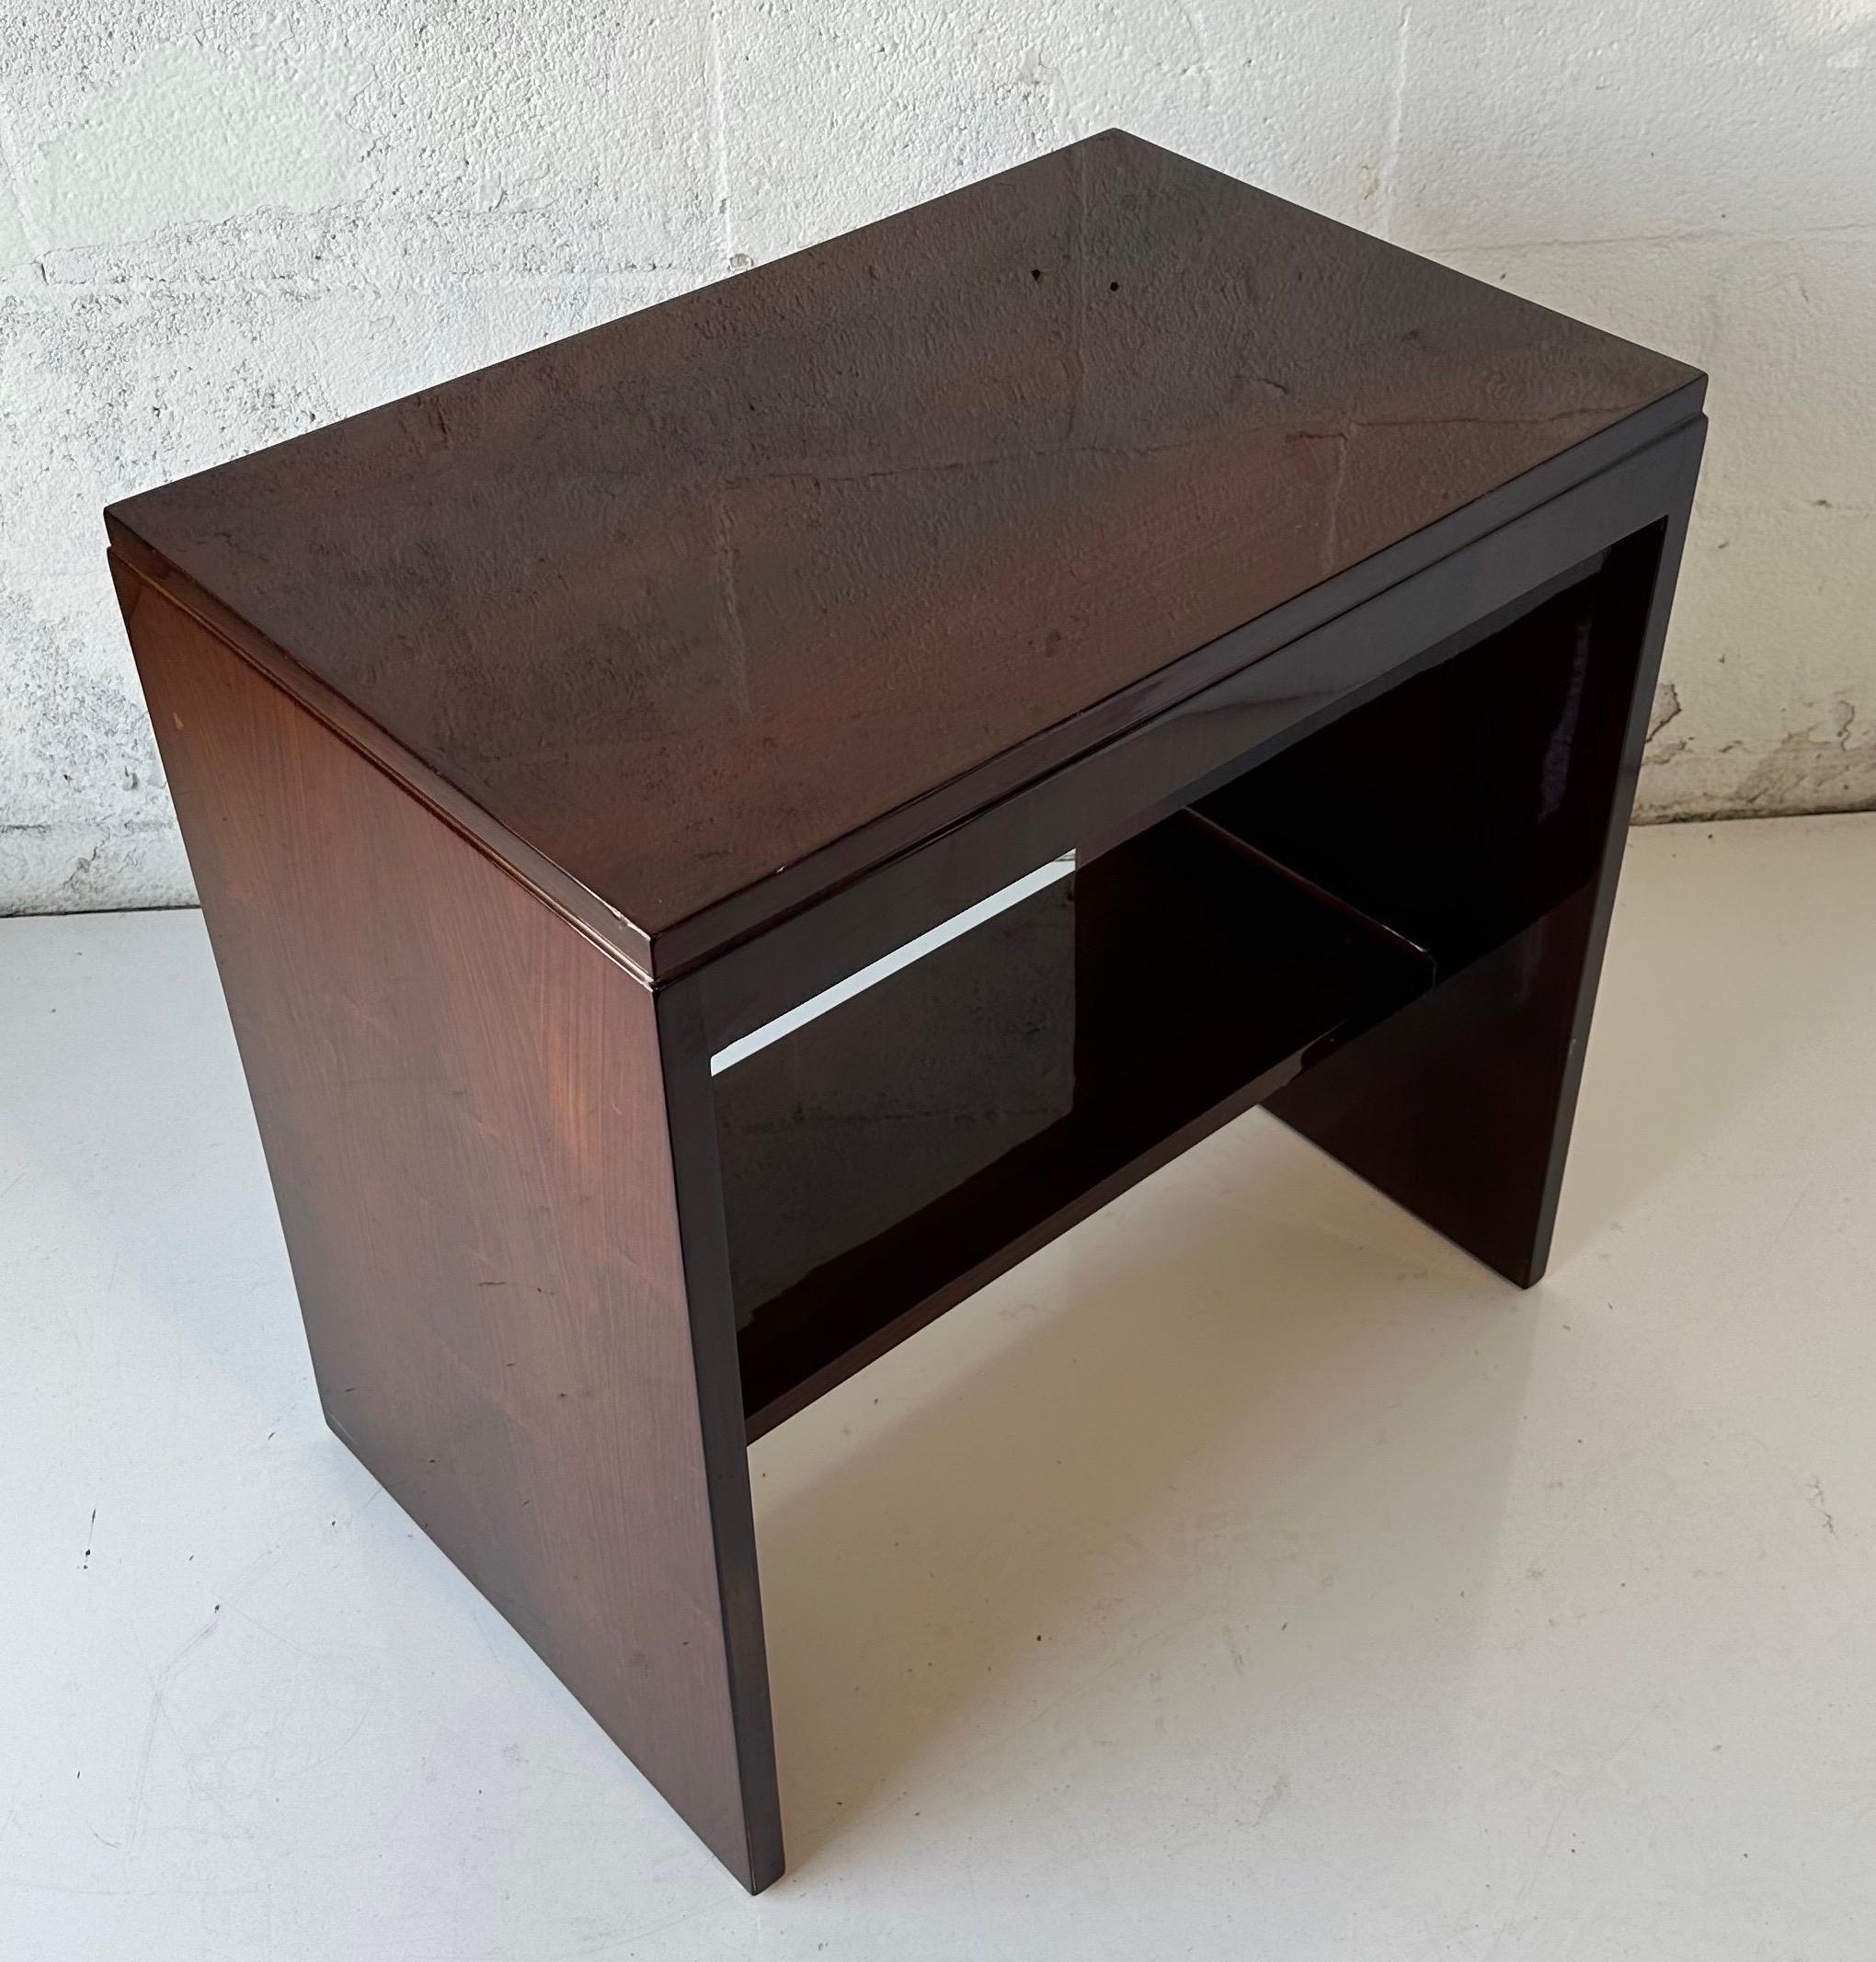 Beautiful Art Deco Side Table in Rosewood.
Elegant and minimalist straight line.
High Gloss Lacquer finish on Rosewood Veneer.